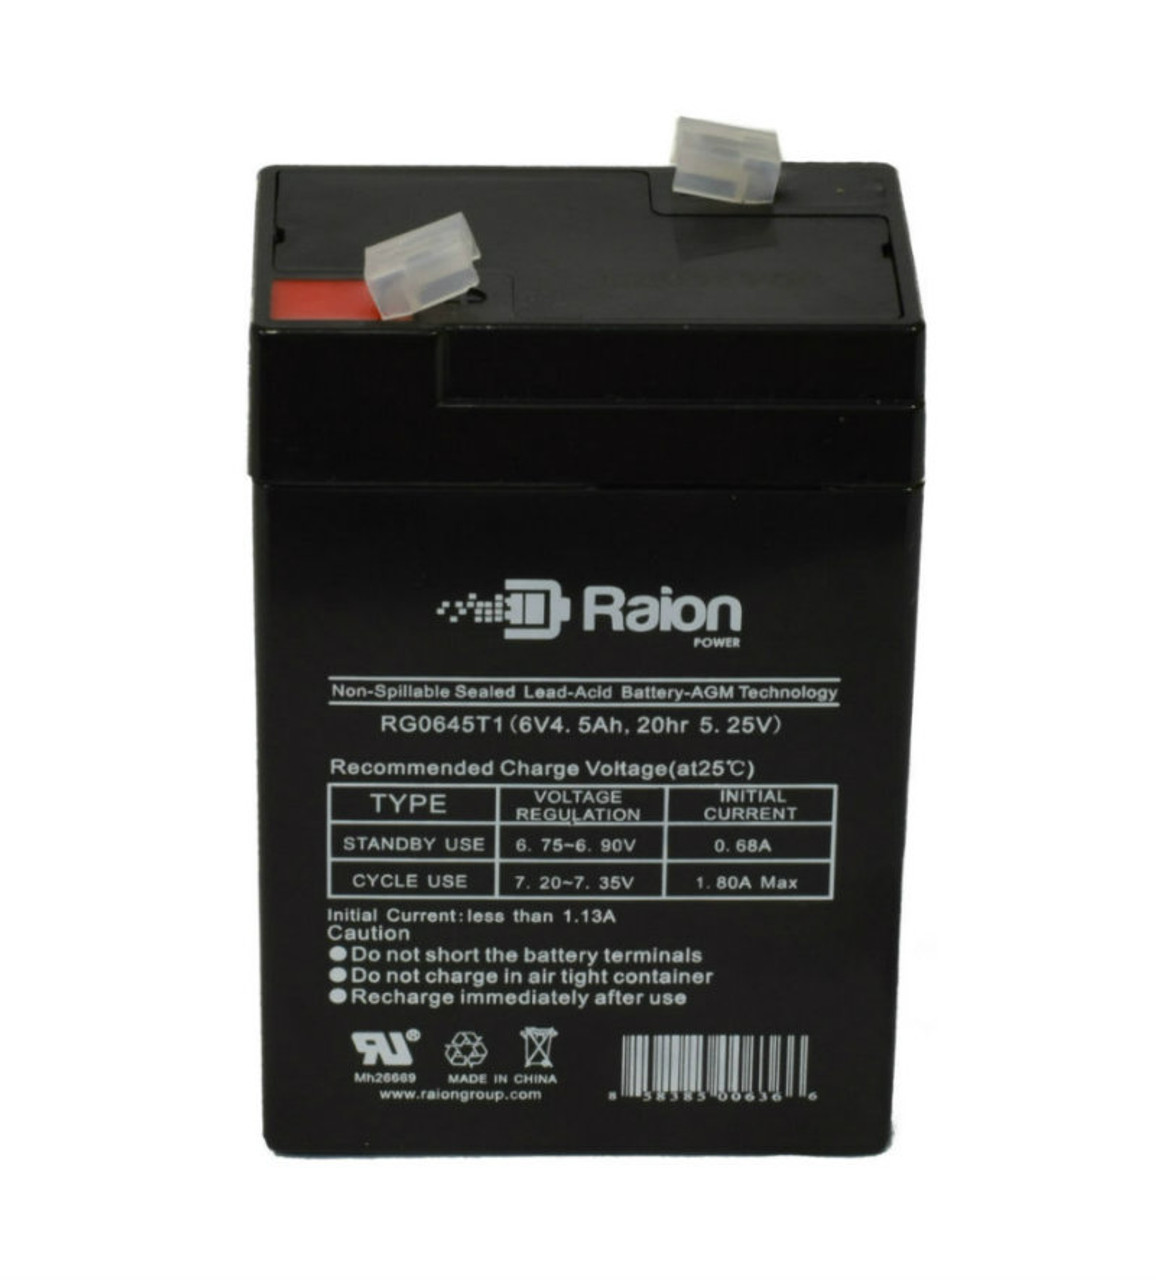 Raion Power RG0645T1 Replacement Battery Cartridge for Lucas LSLA4-6